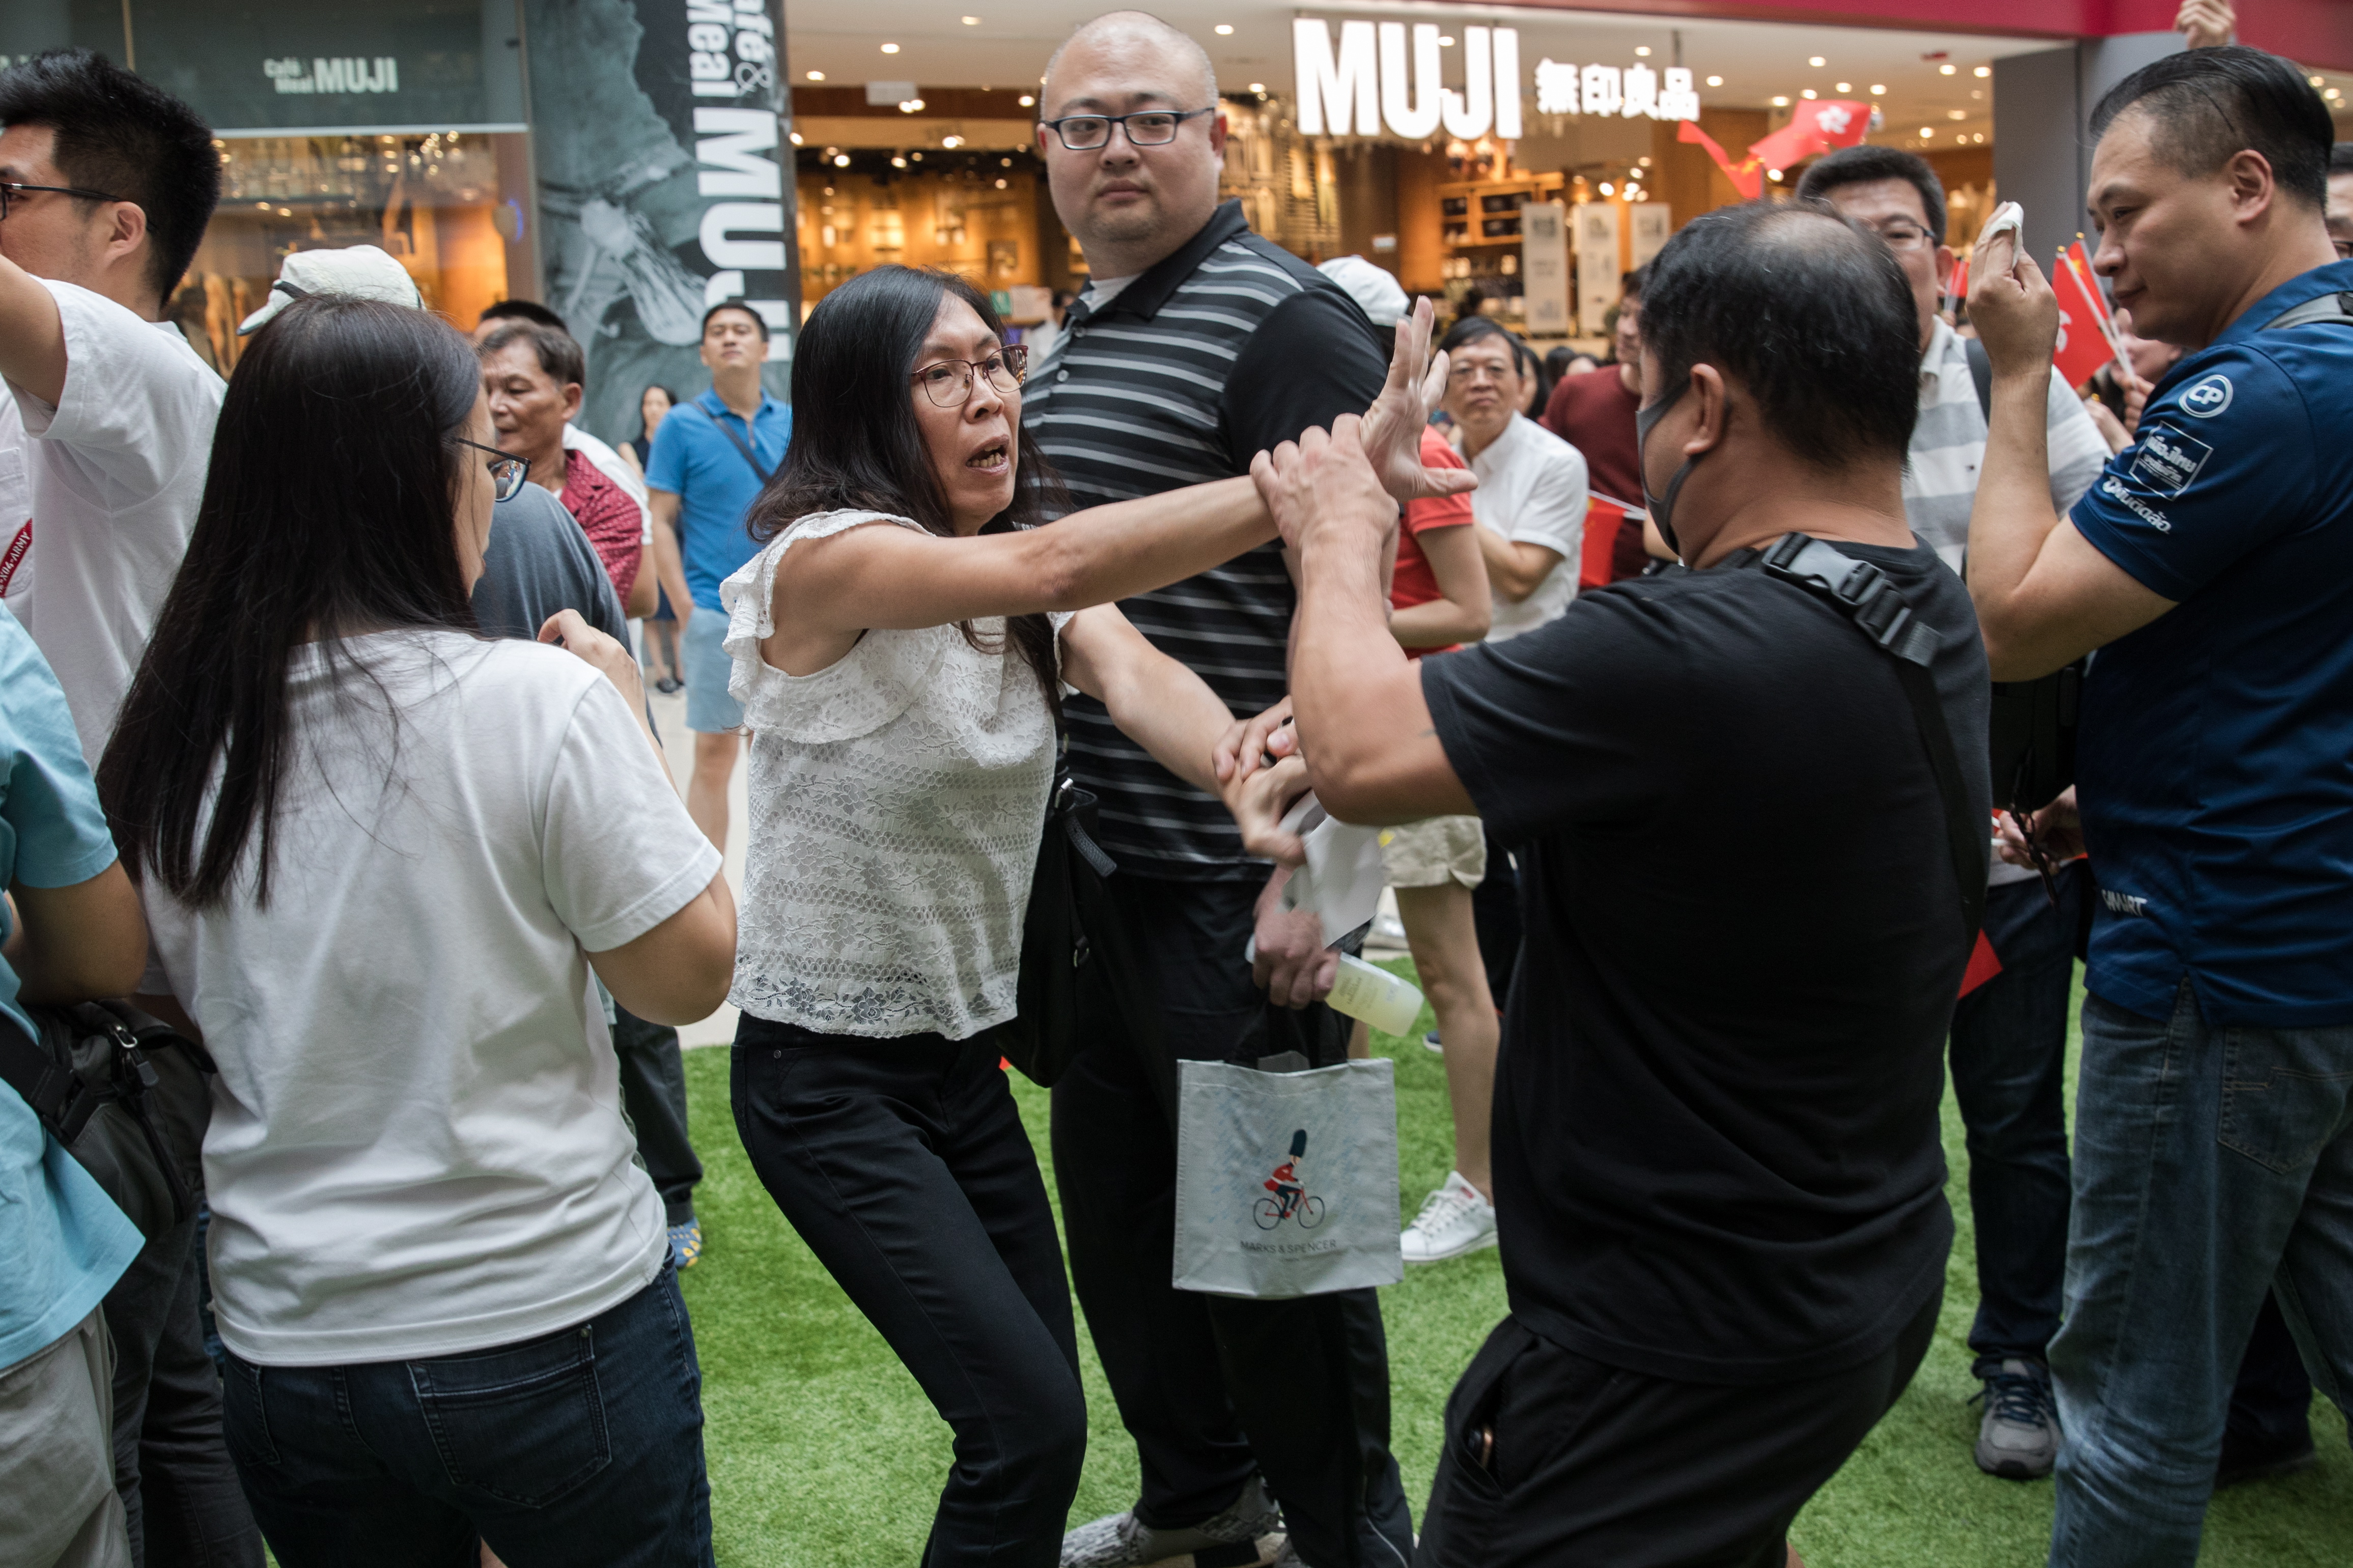 epa07838836 A pro-China supporter (C) scuffles with a pro-Hong Kong supporter (R) during a flash mob event held by China supporters in a shopping mall in Hong Kong, China, 13 September 2019. Recently many shopping malls have witnesed large numbers of pro-China supporters and pro-Hong Kong supporters trying to out-sing and out-shout each other.  EPA/JEROME FAVRE